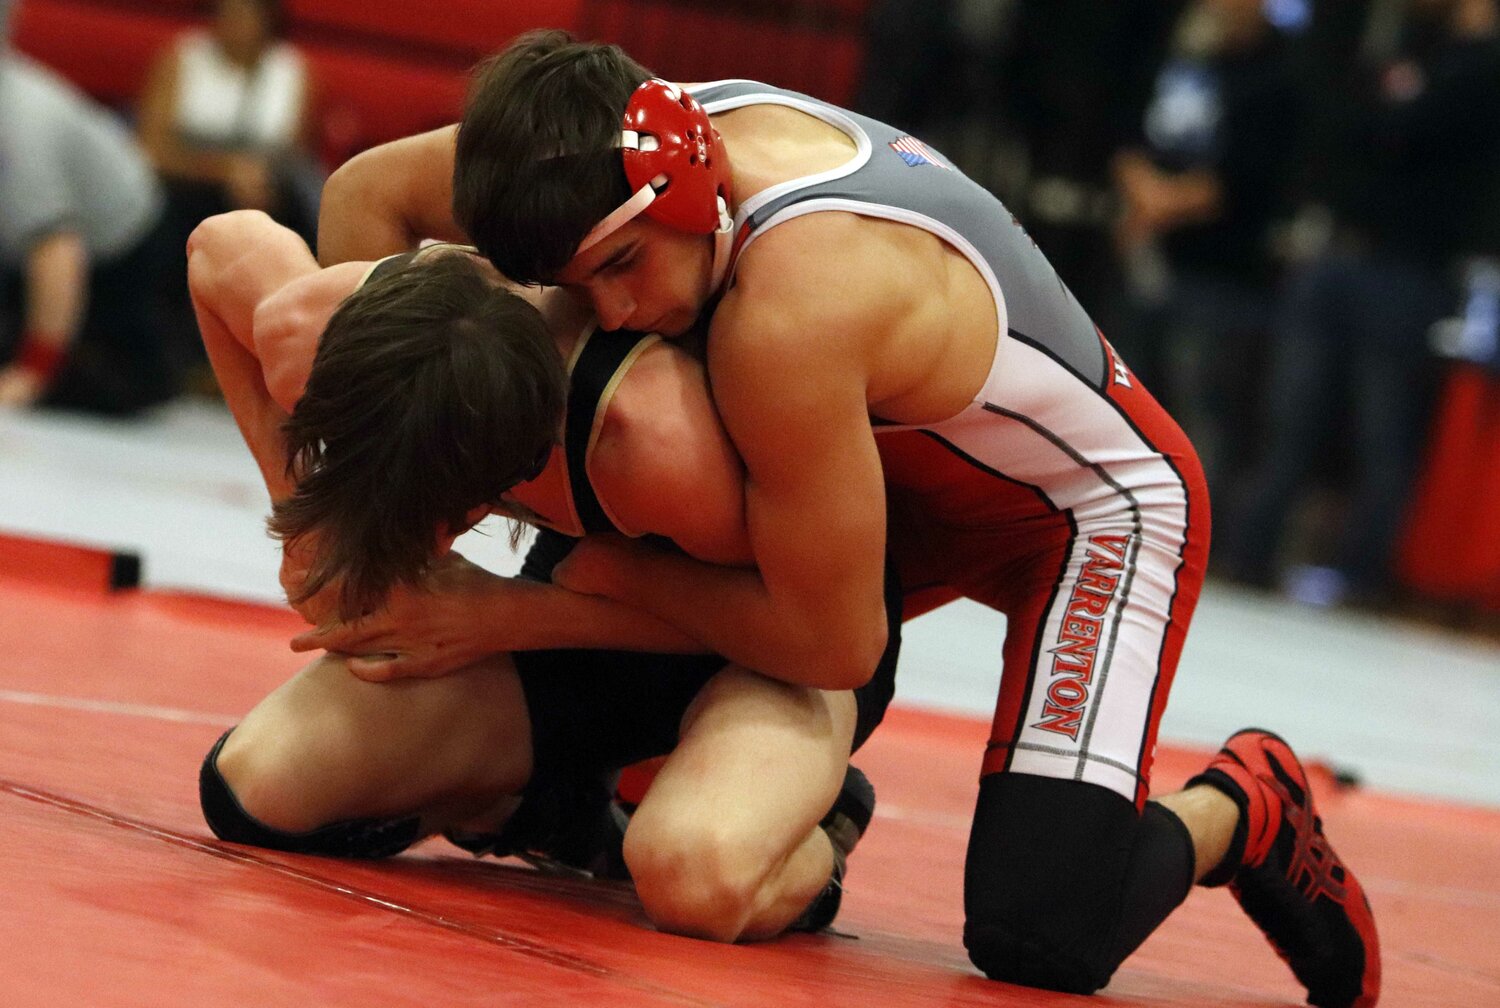 Noah Lohrmann competes at the Liberty Invite last weekend. Lohrmann placed second in the 138-pound weight class.